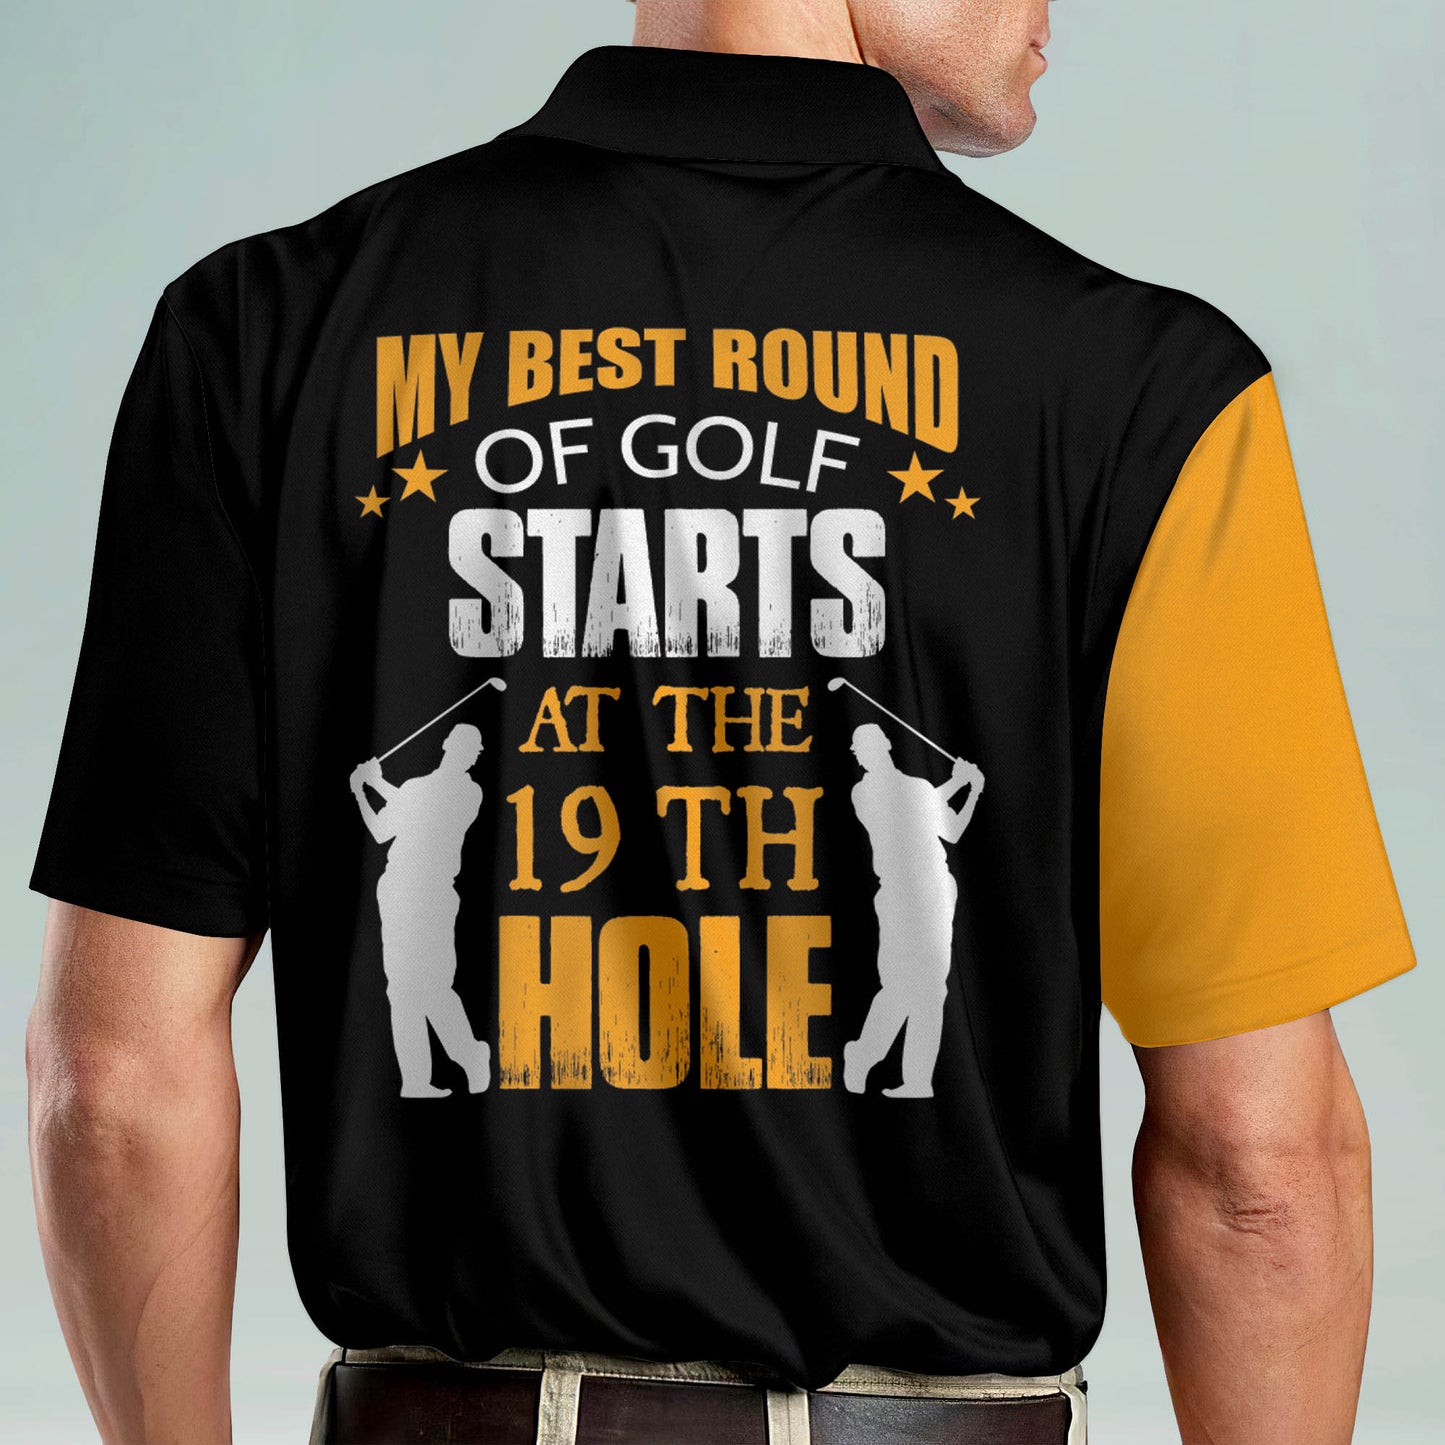 My Best Round of Golf Starts at The 19th Hole Golf Polo Shirt GM0271